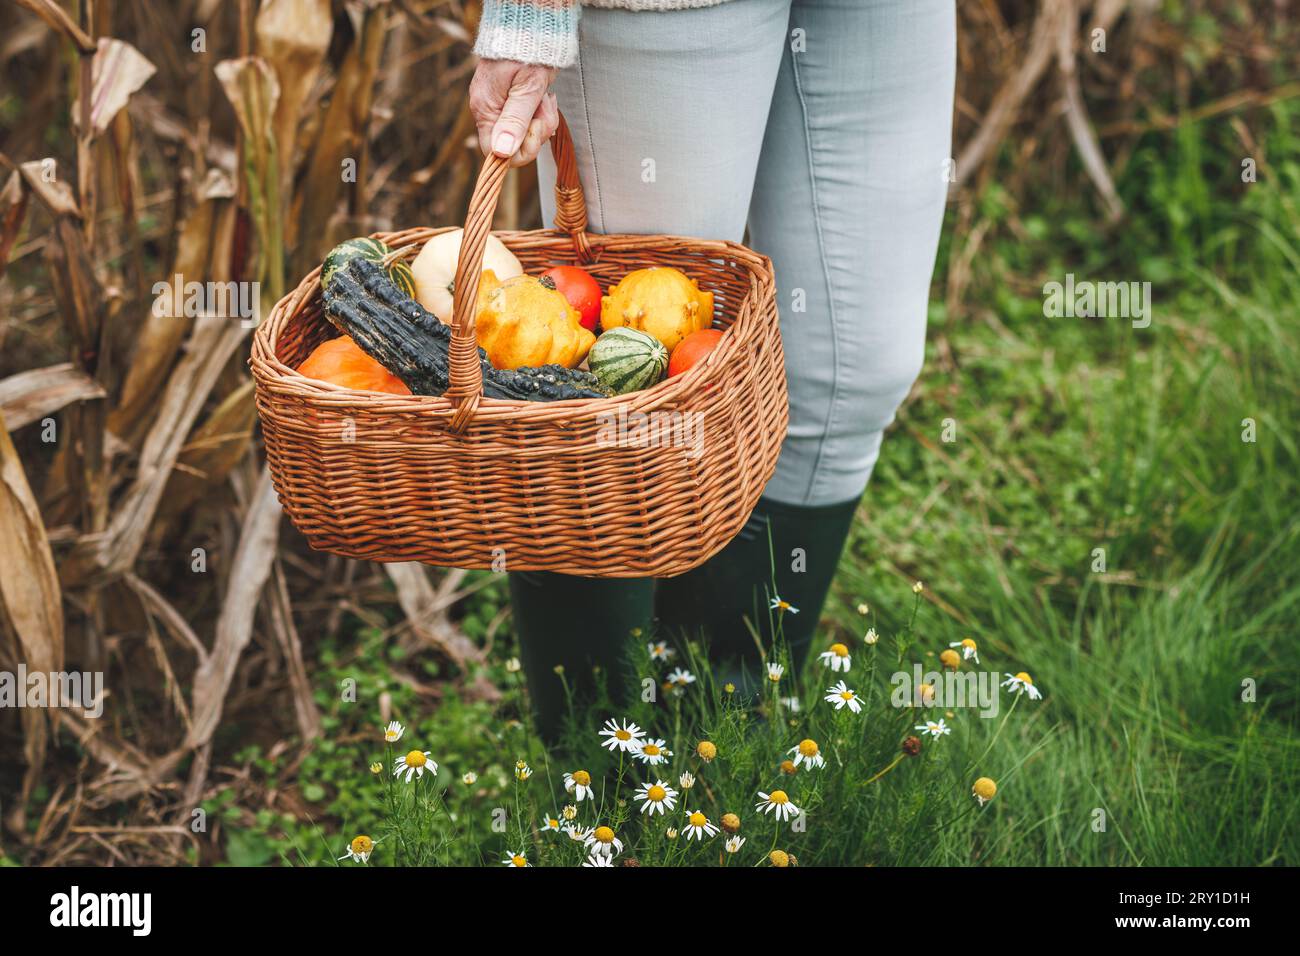 Woman holding decorative pumpkins in wicker basket. Autumn harvest and natural decoration for halloween or thanksgiving holiday Stock Photo